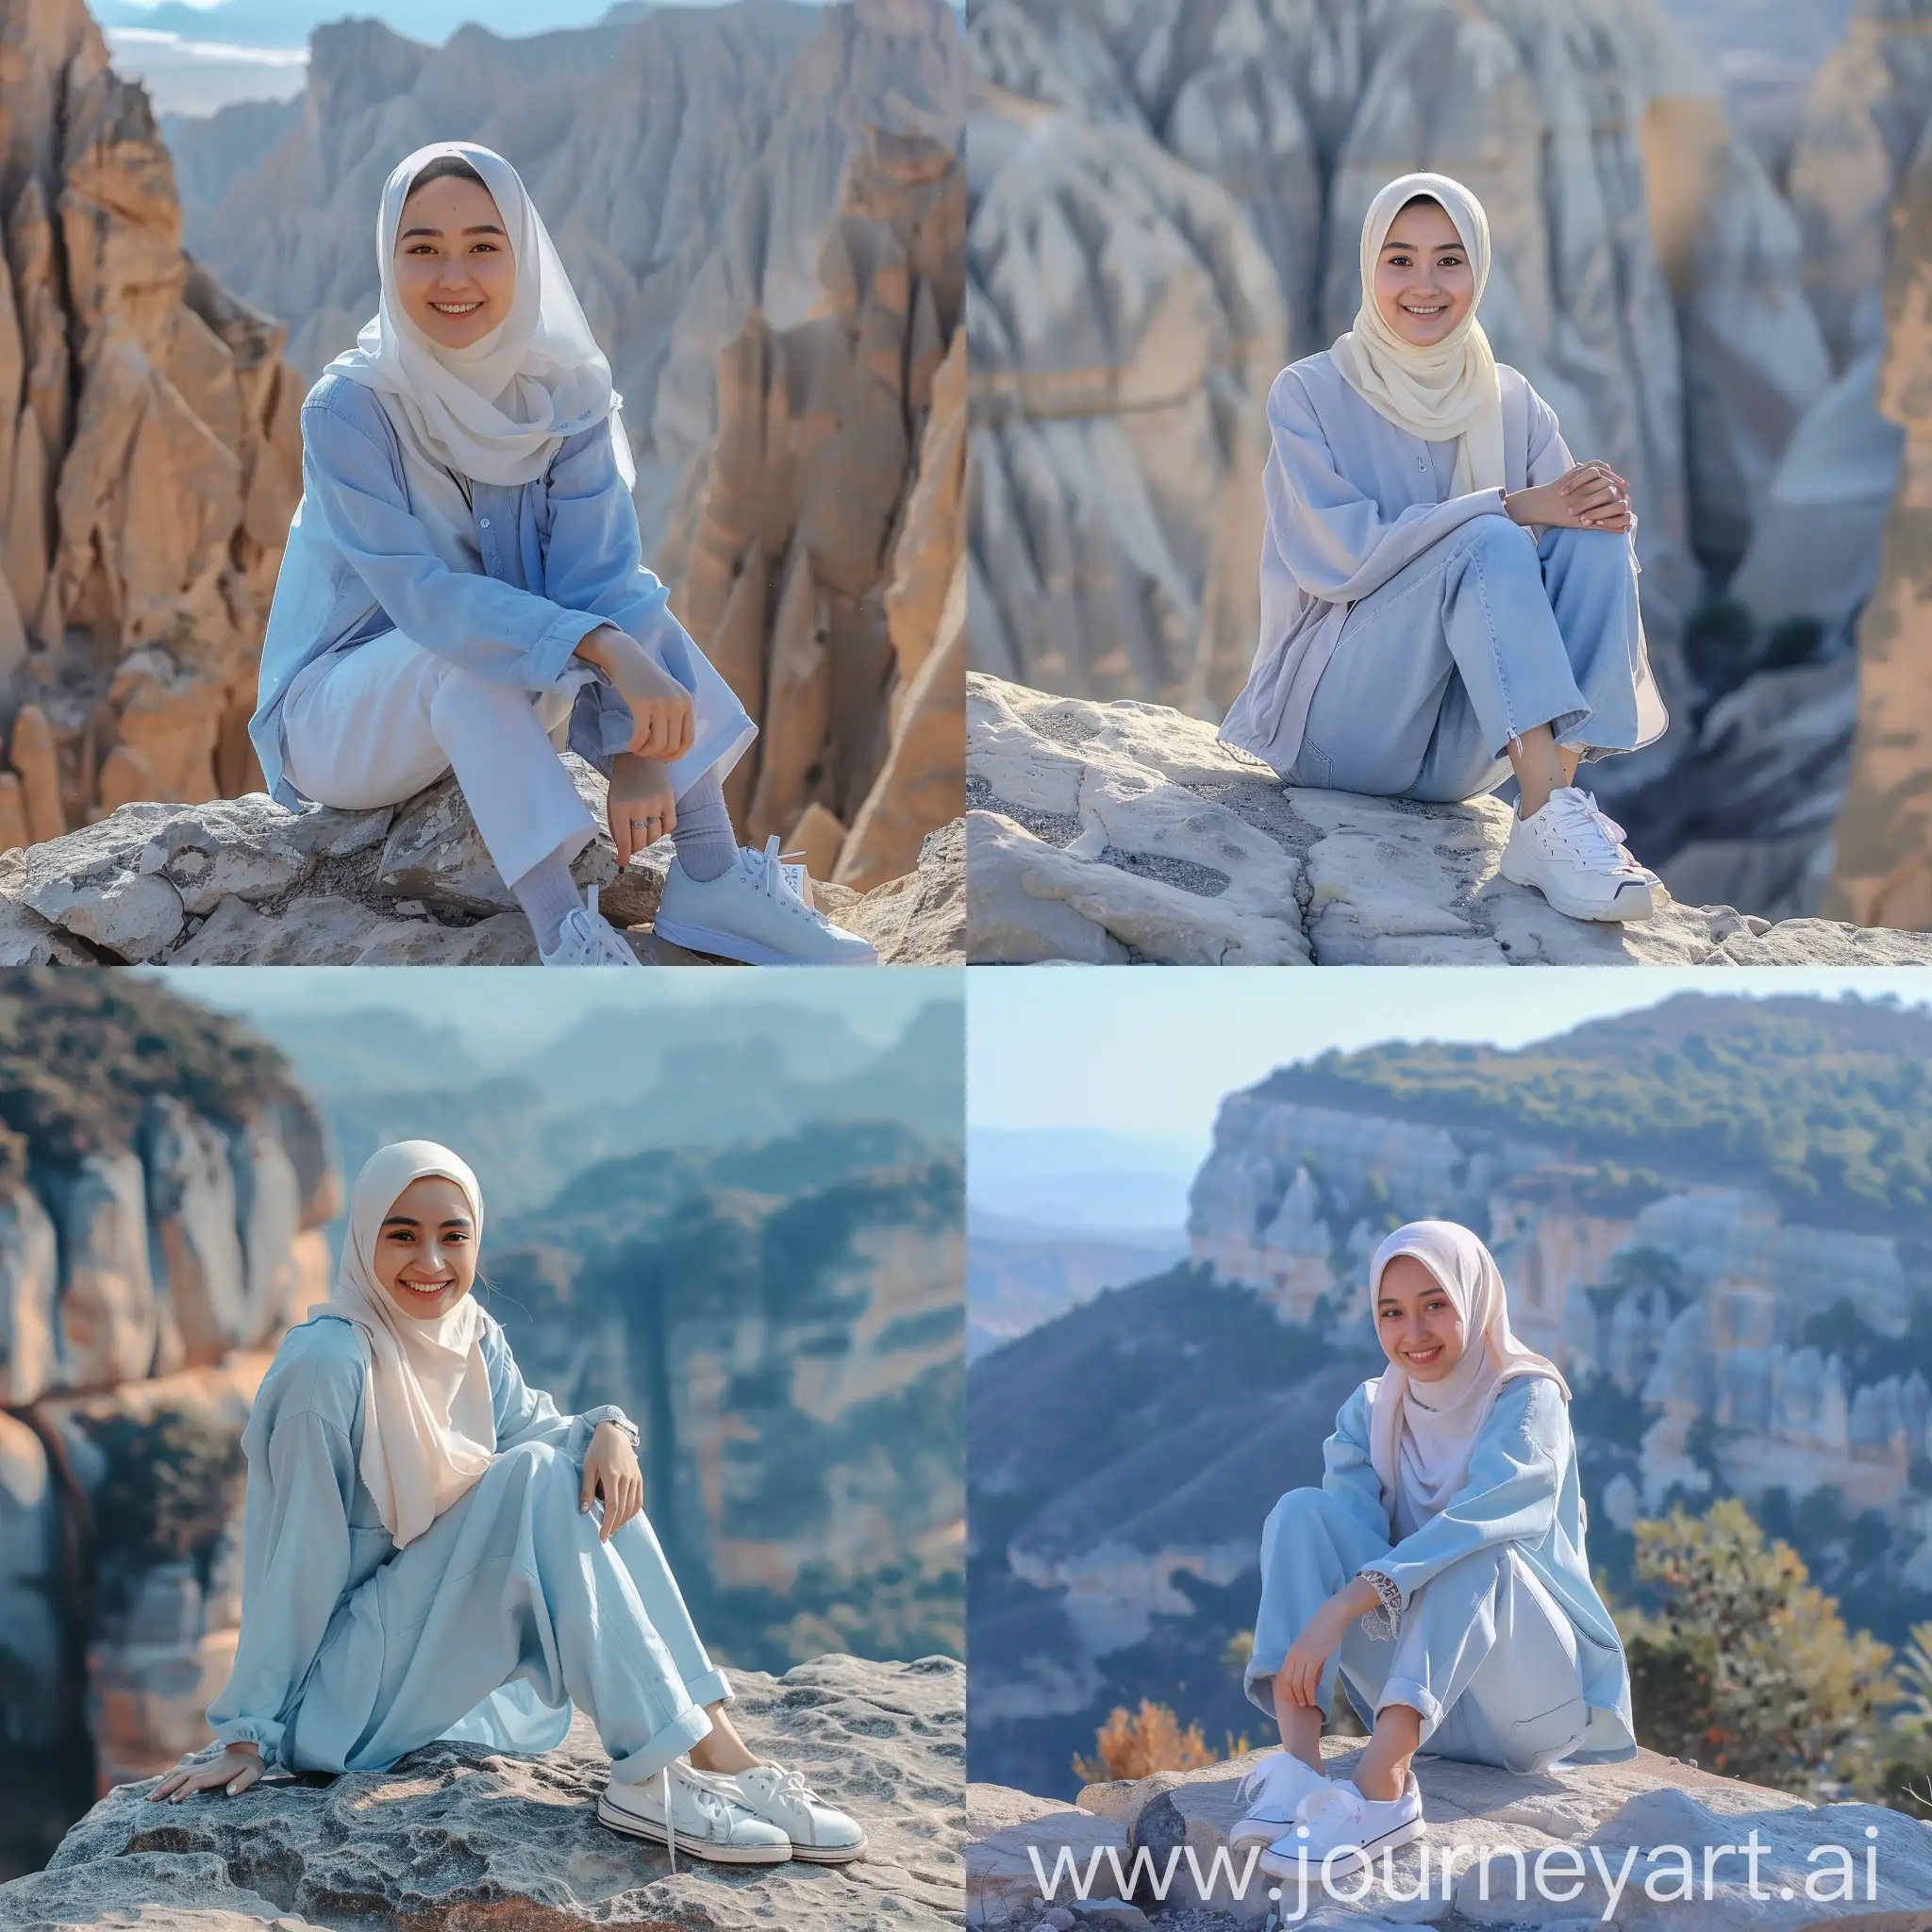 Young-Asian-Woman-in-Hijab-Sitting-on-Rock-with-Mountain-View